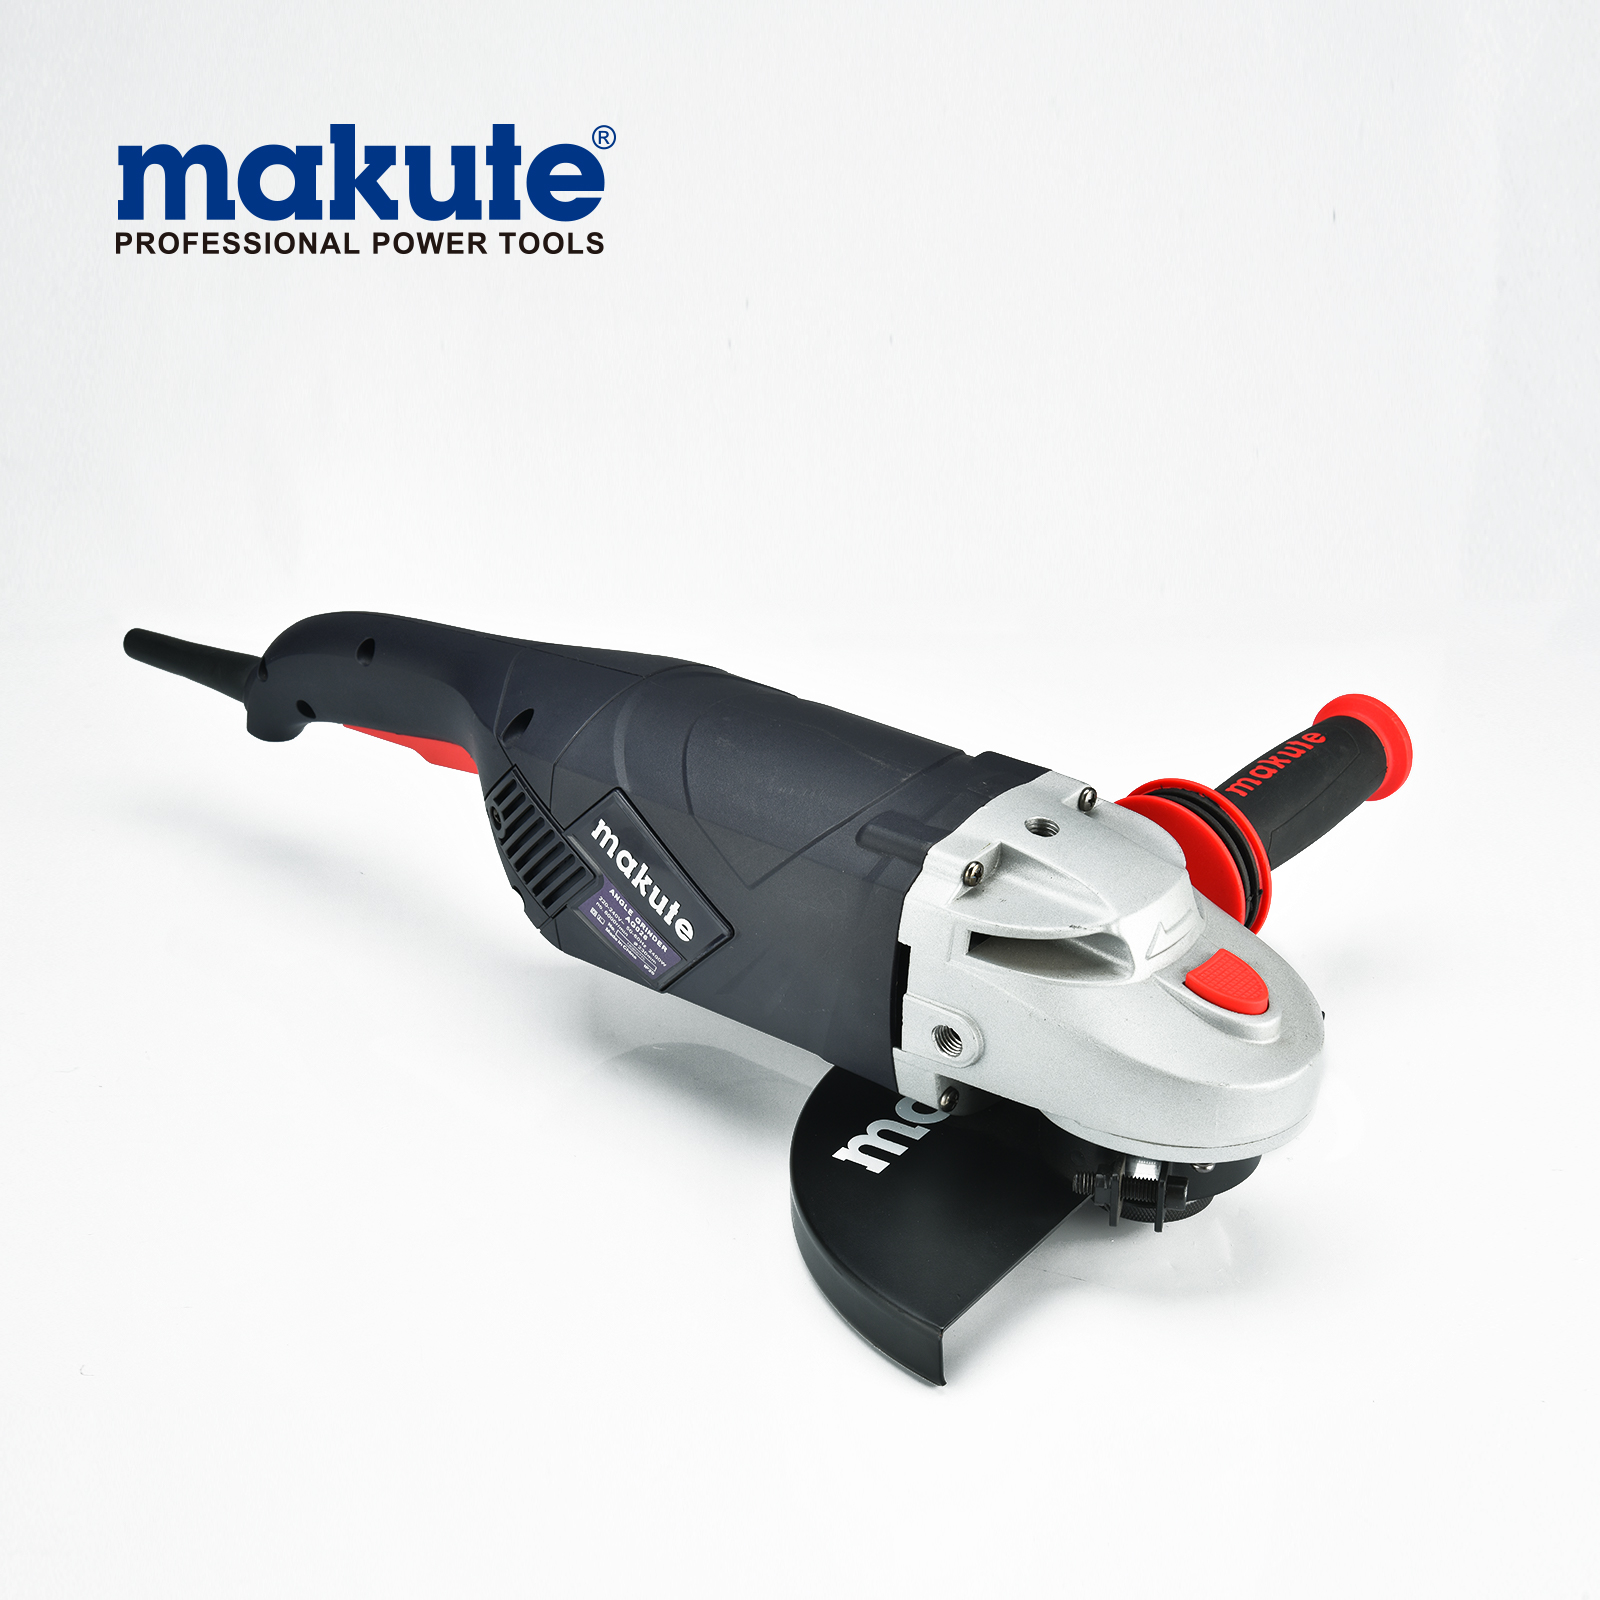 makute 7inch powered angle grinder 